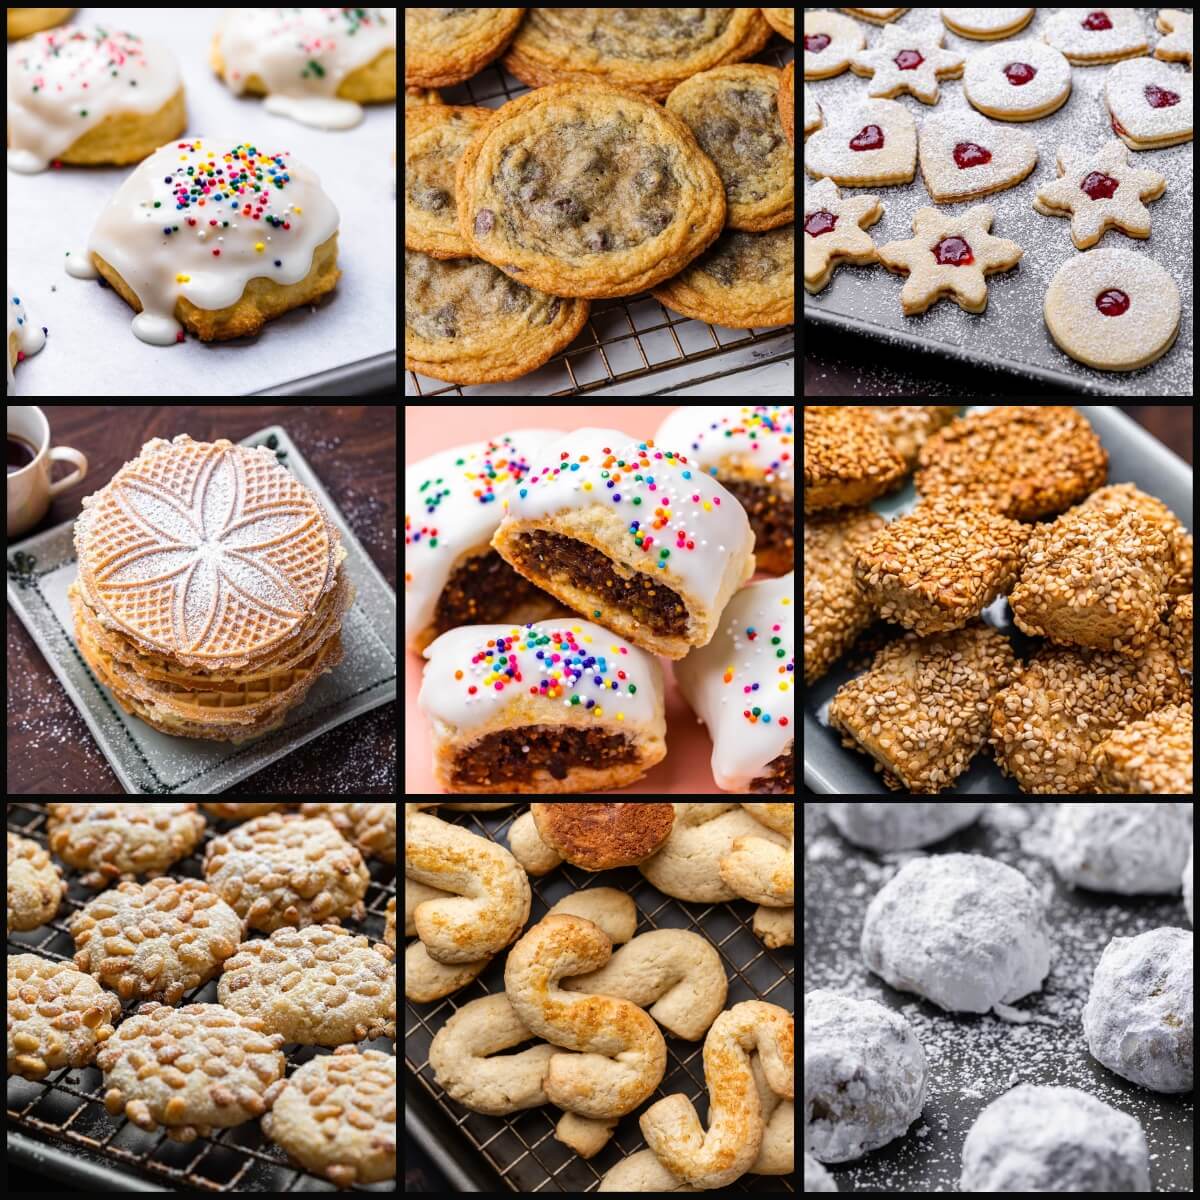 Christmas cookie collage showing: lemon ricotta, chocolate chip, linzer, pizelle, cucidati, reginelle, pignoli, S, and snowball cookies.